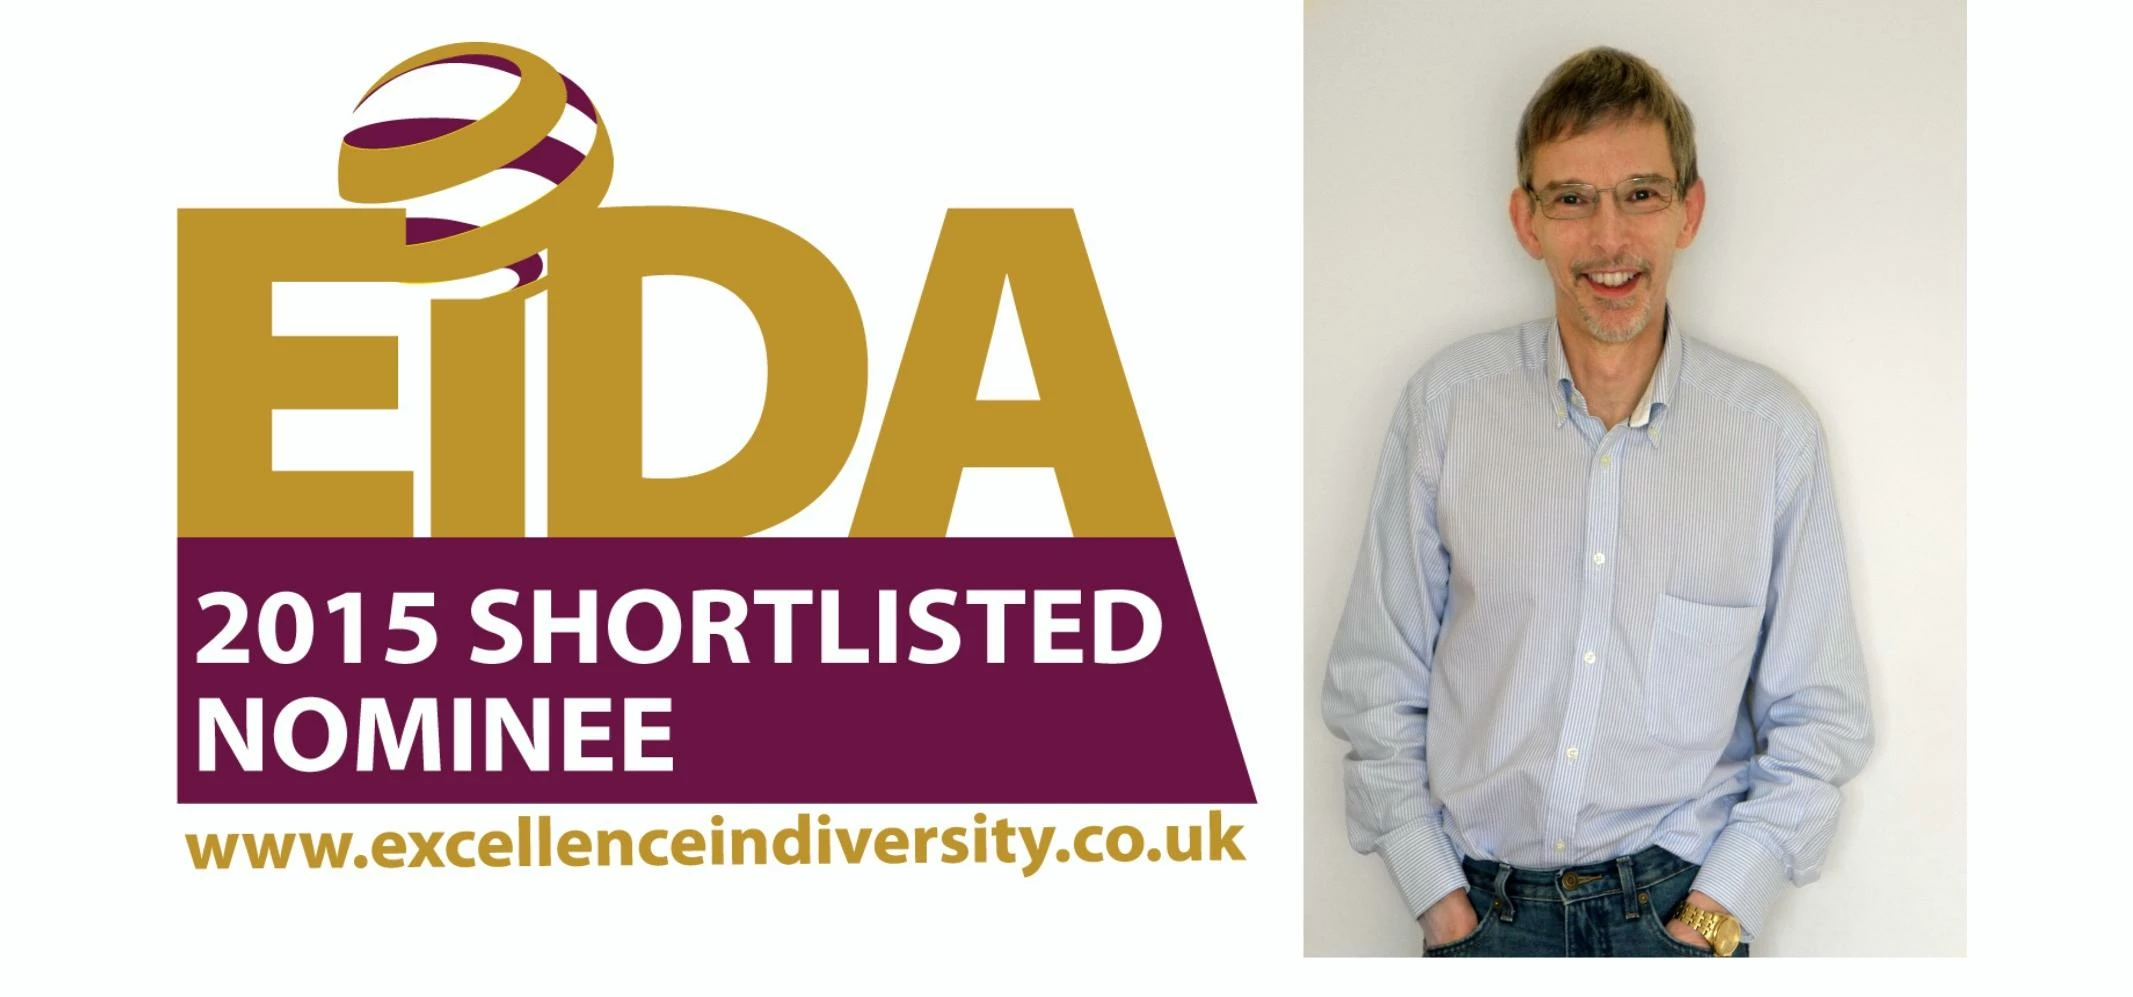 Colin Dean from Special iApps has been shortlisted for the 2015 Diversity Champion Award for Educati